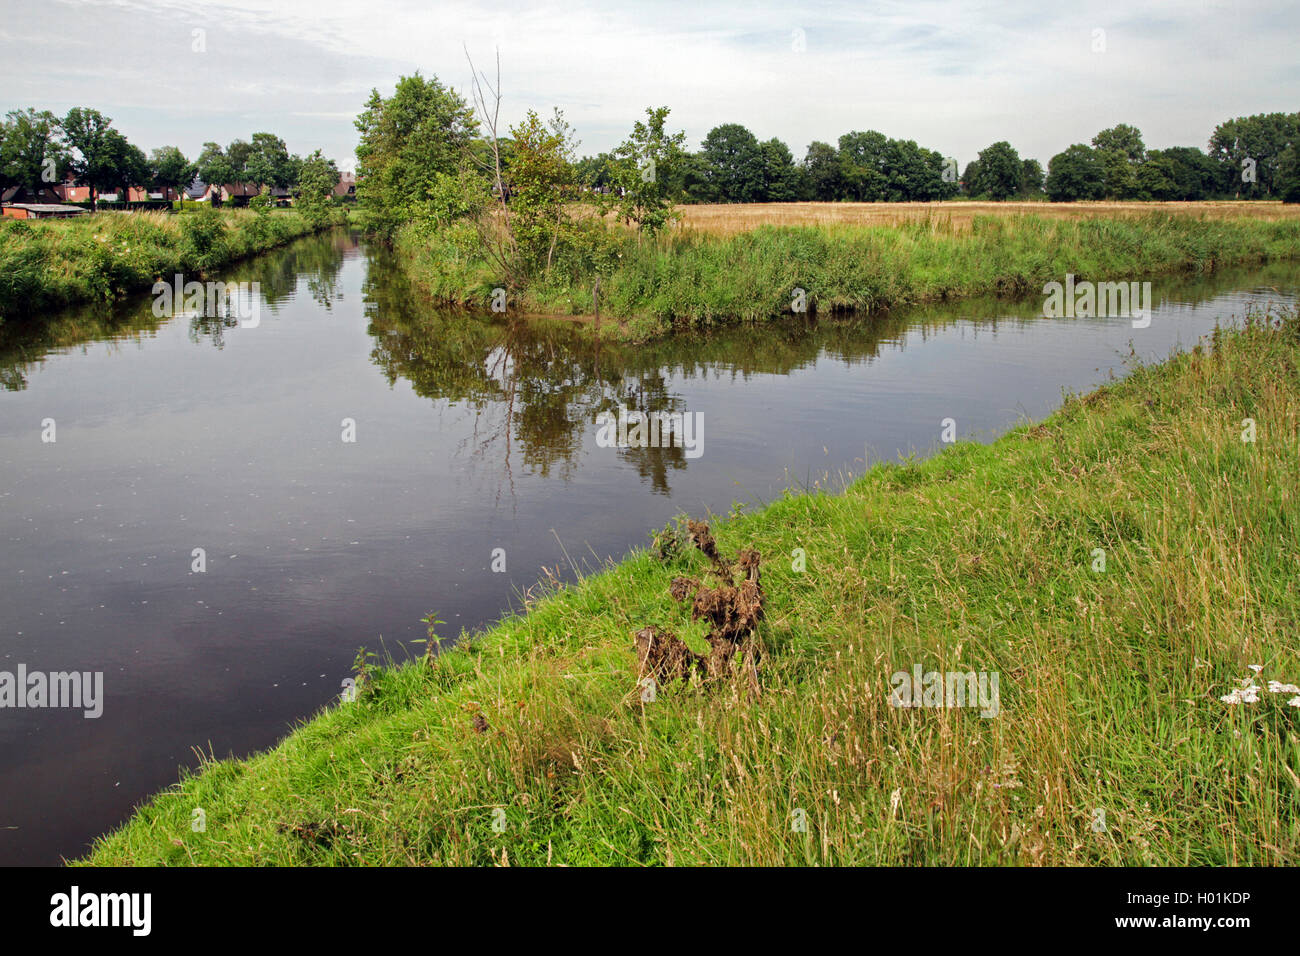 confluence of the rivers Bocholter Aa and Borkener Aa, Germany, North Rhine-Westphalia, Muensterland Stock Photo